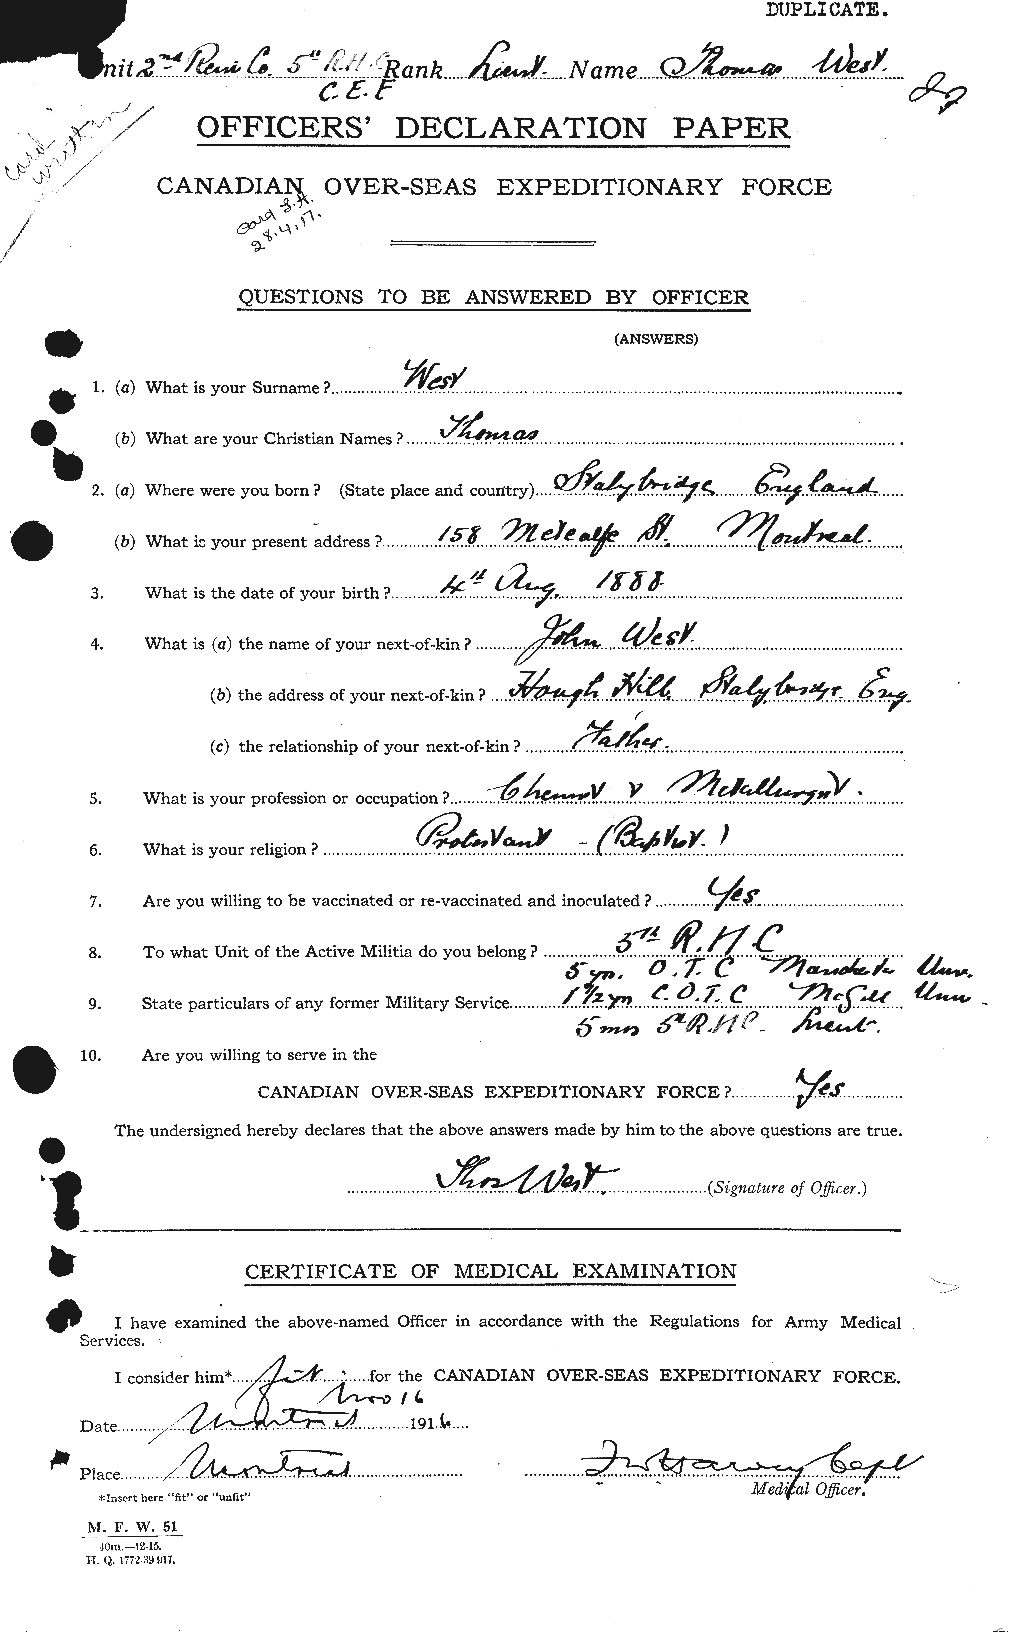 Personnel Records of the First World War - CEF 667956a